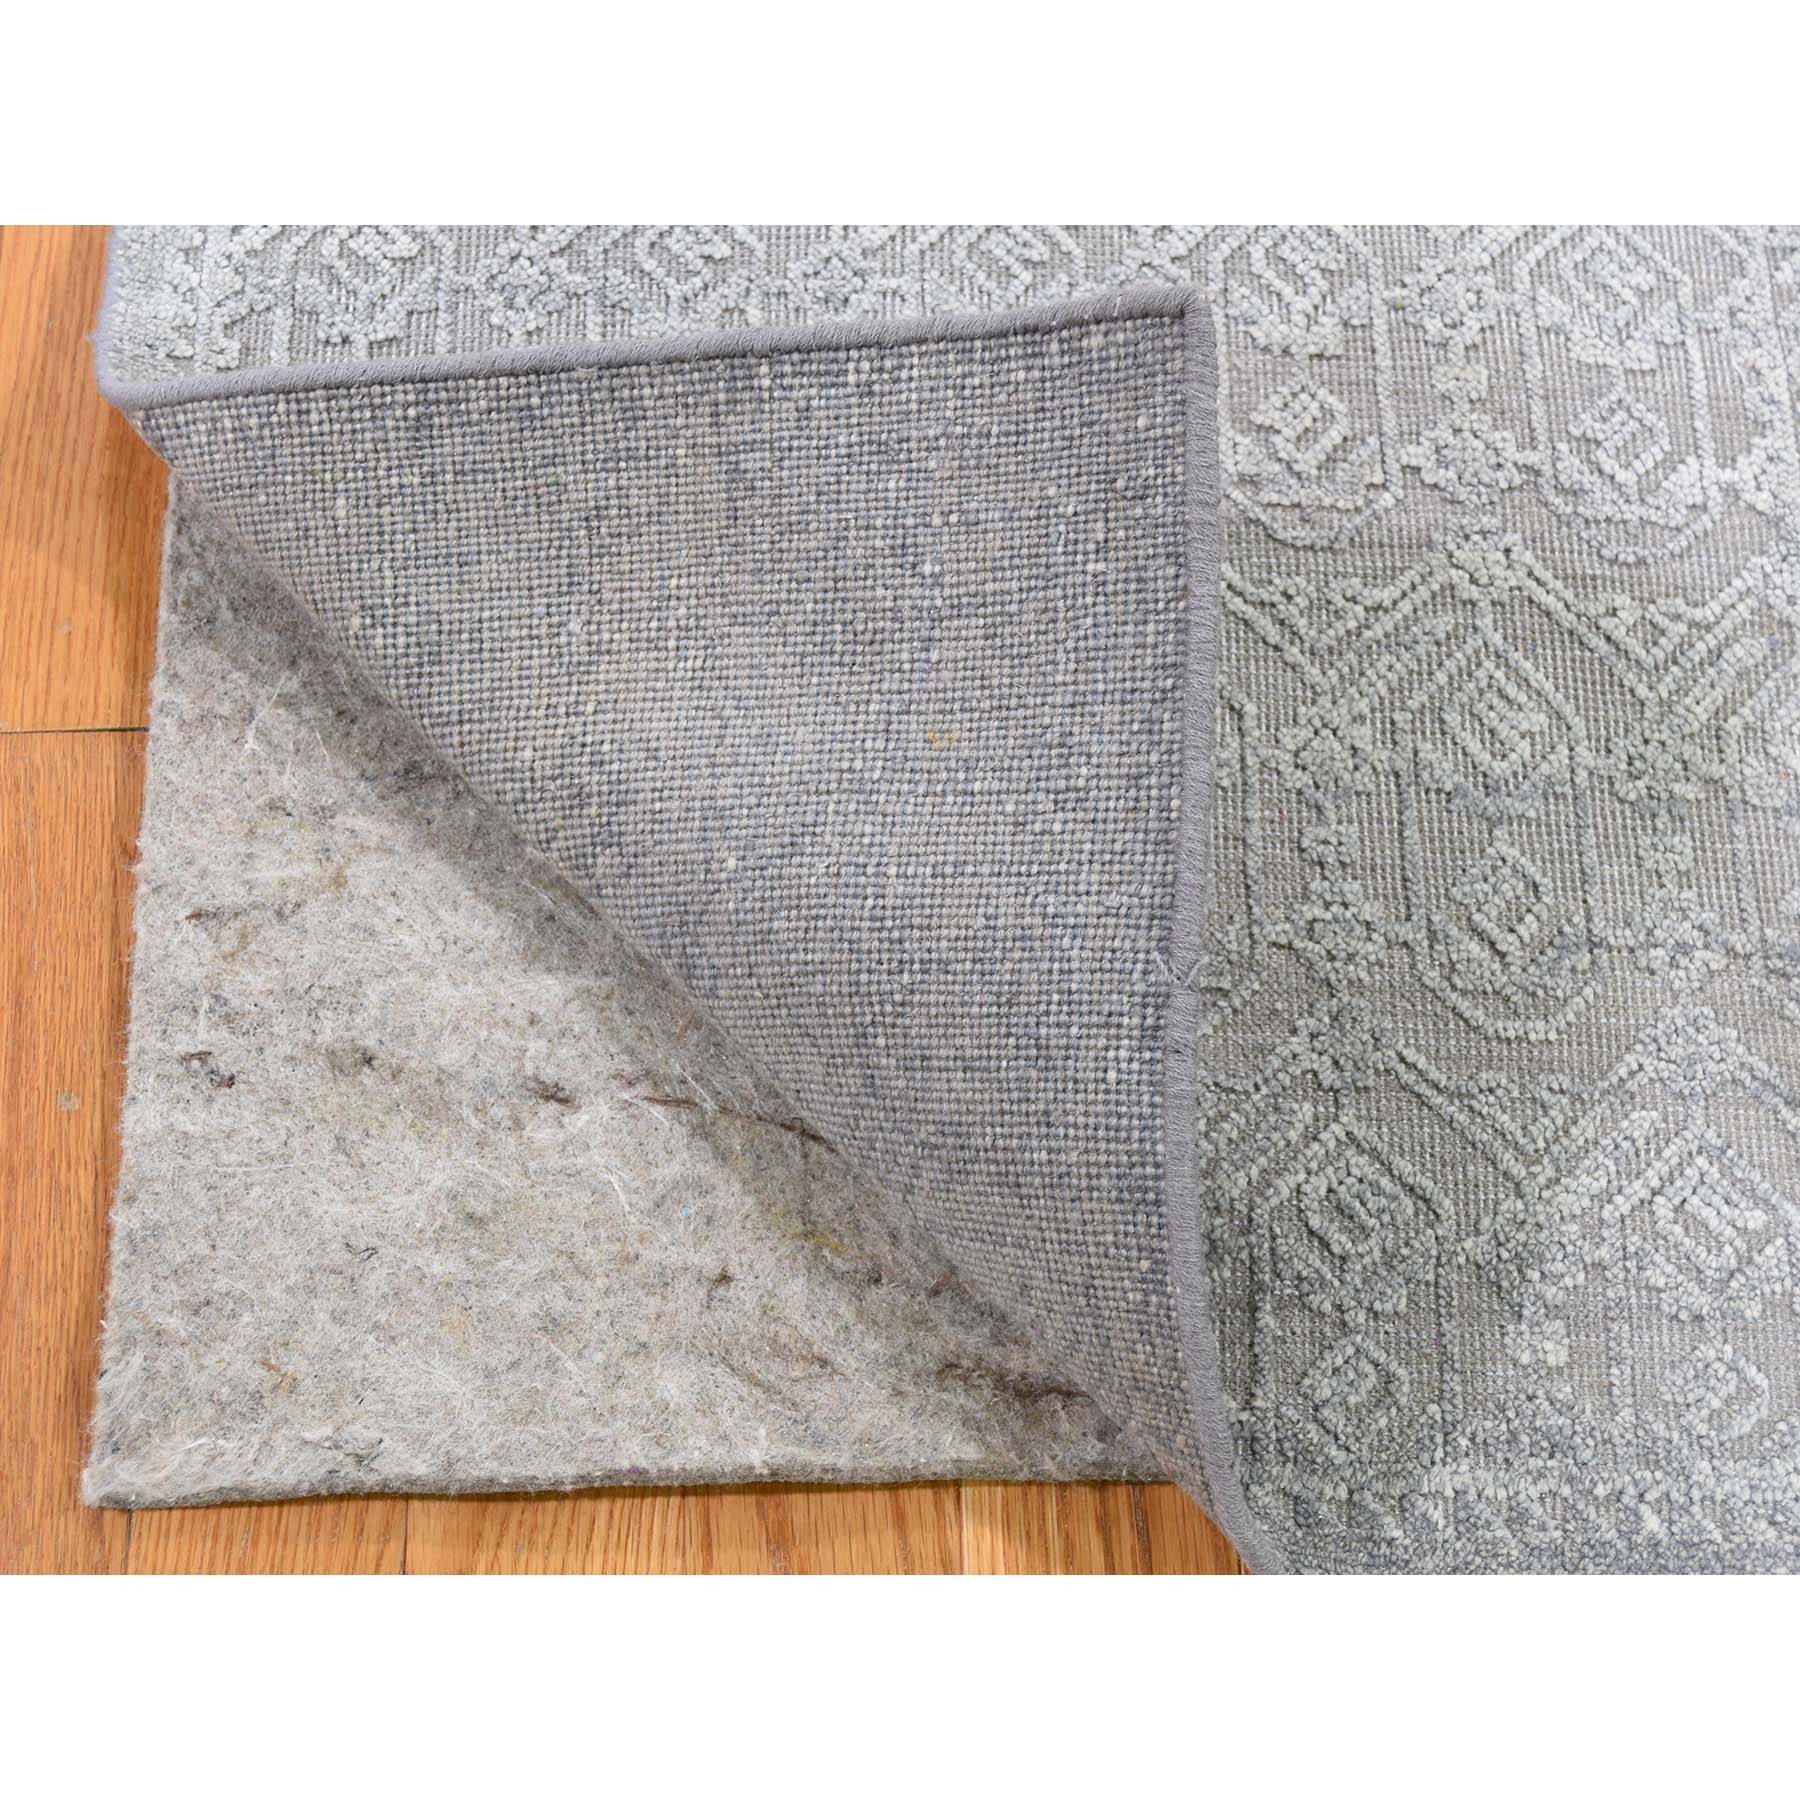 2'x2'1" Silk With Textured Wool Hand Woven Oriental Sample Rug 